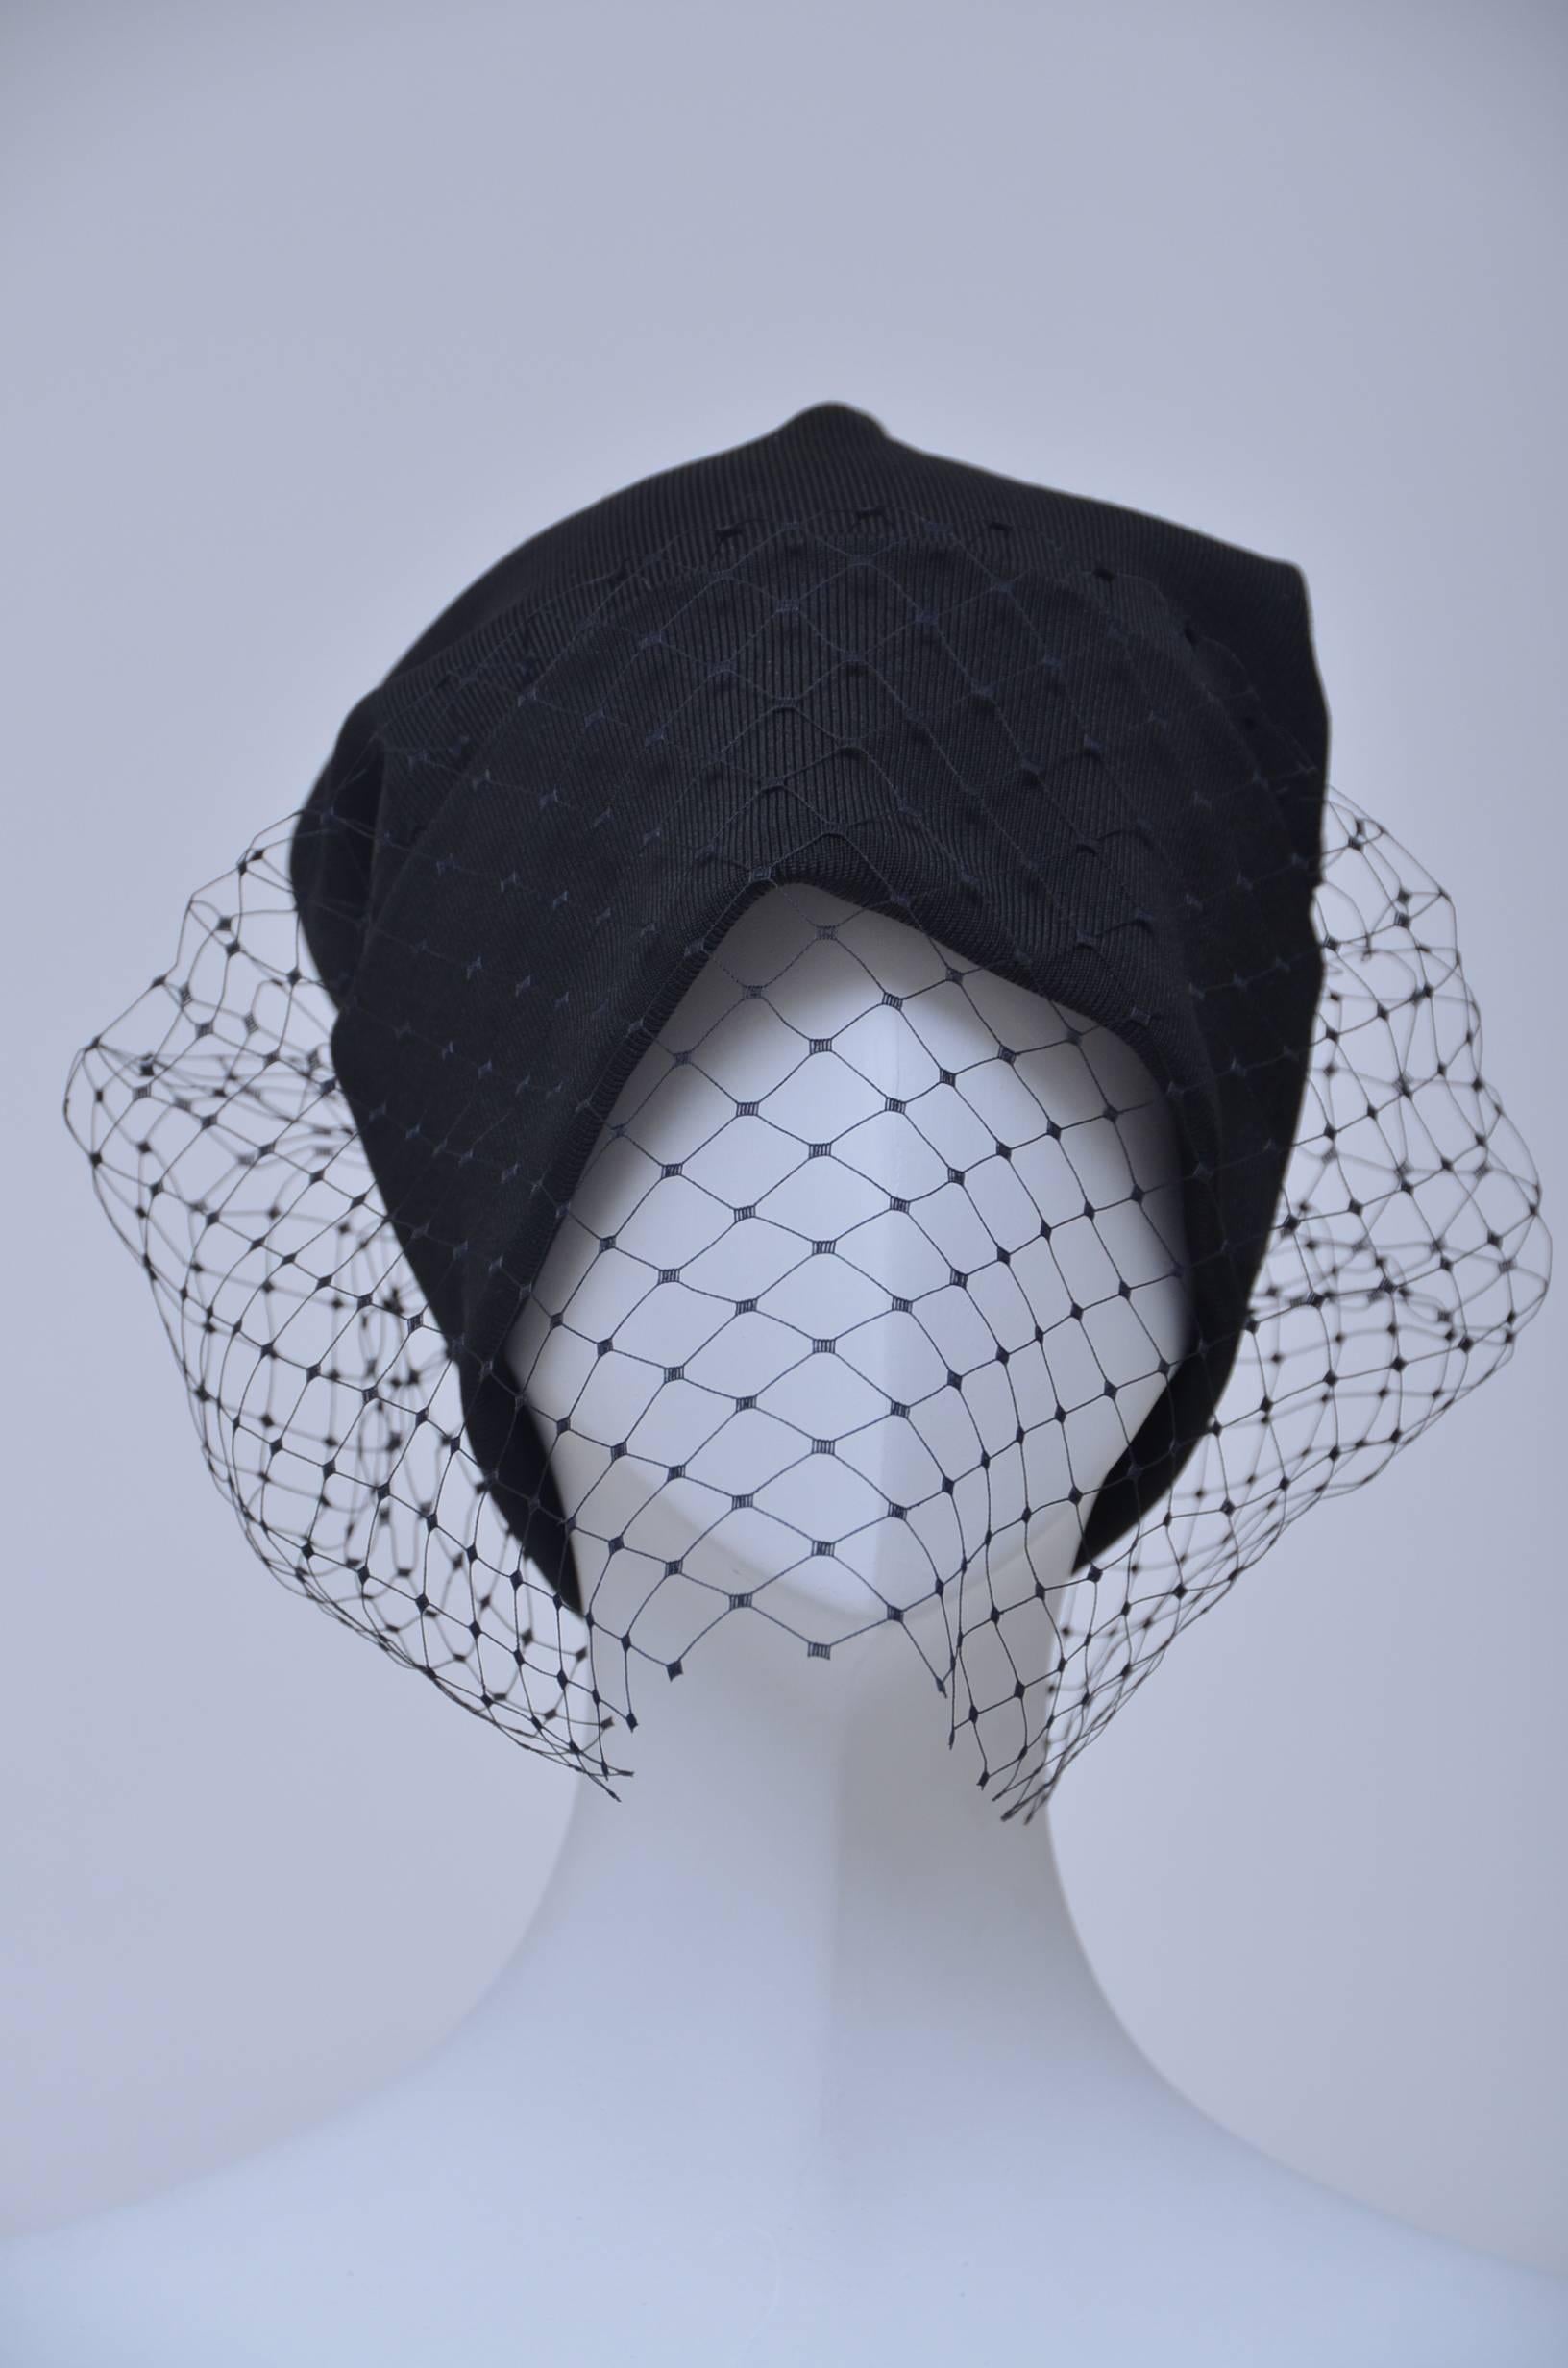 Stephen Jones For JIL SANDER  Veiled Beanie  Black Hat.
NEW without tags.
Seen in many magazine editorials and celebrities.

FINAL SALE.